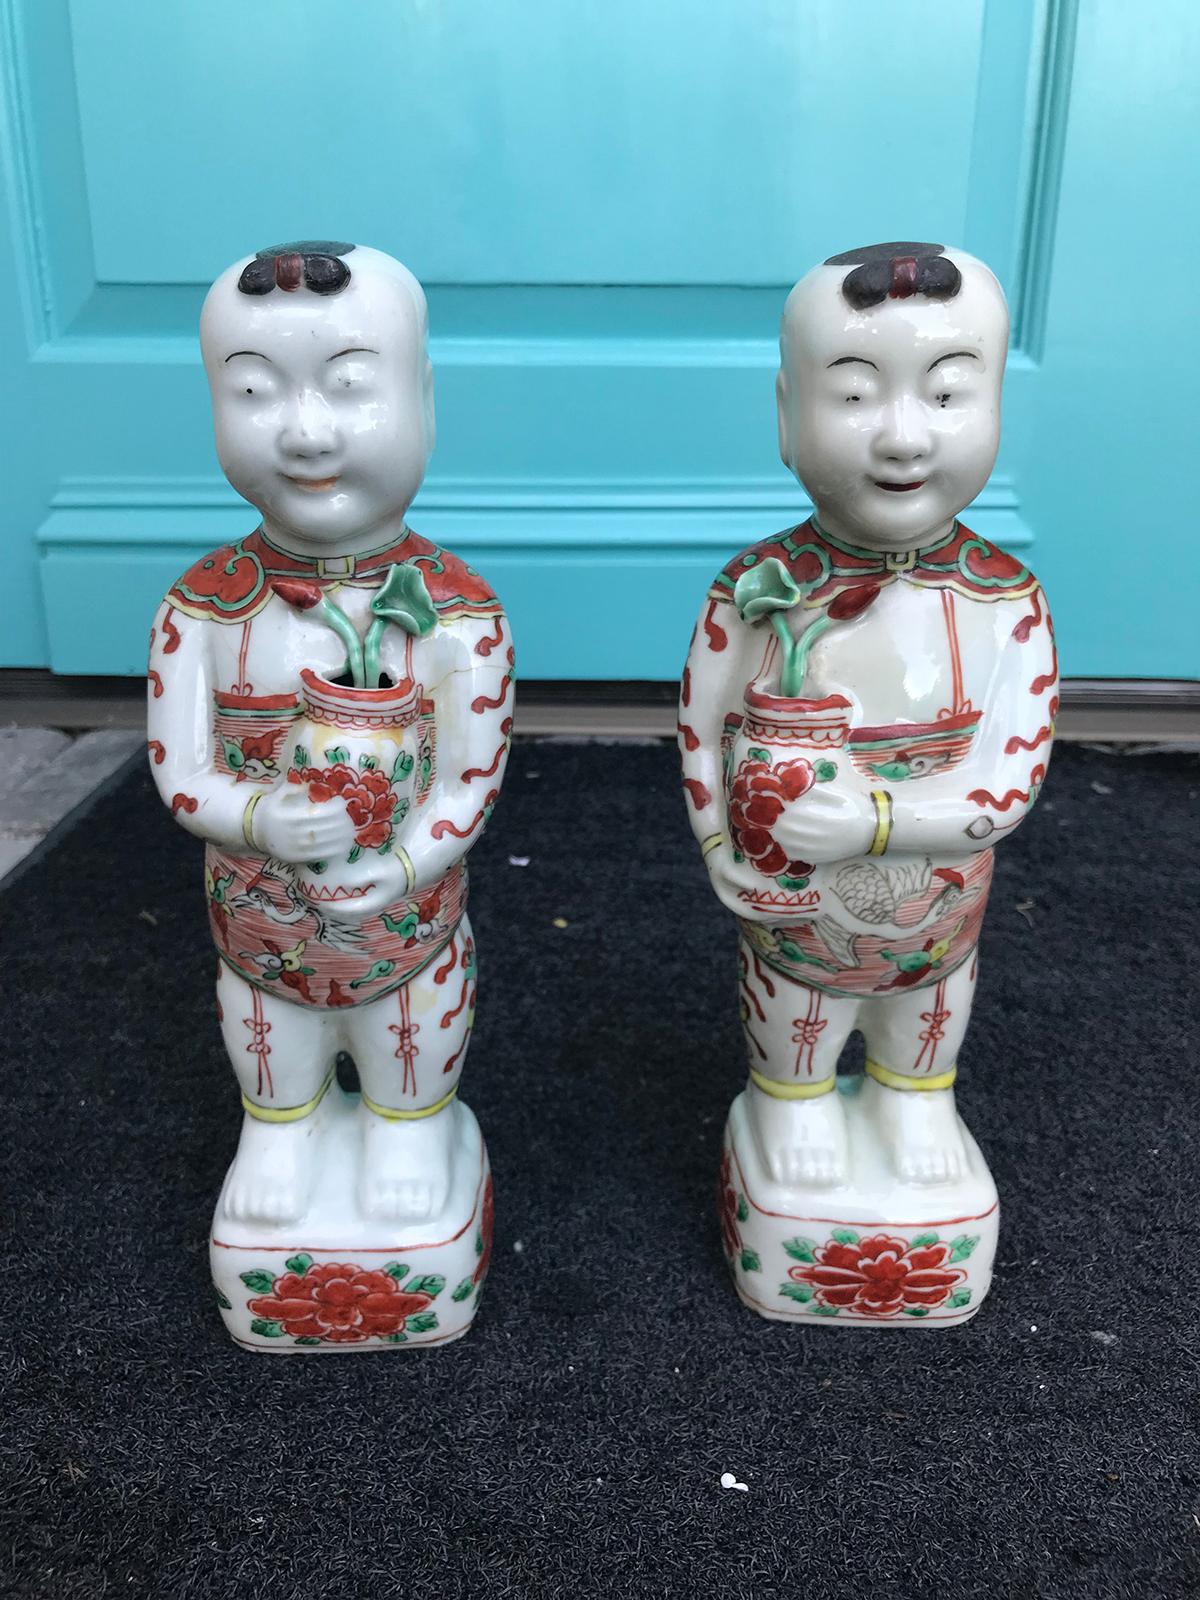 Pair of 19th-20th century Chinese porcelain hoho boys, unmarked.